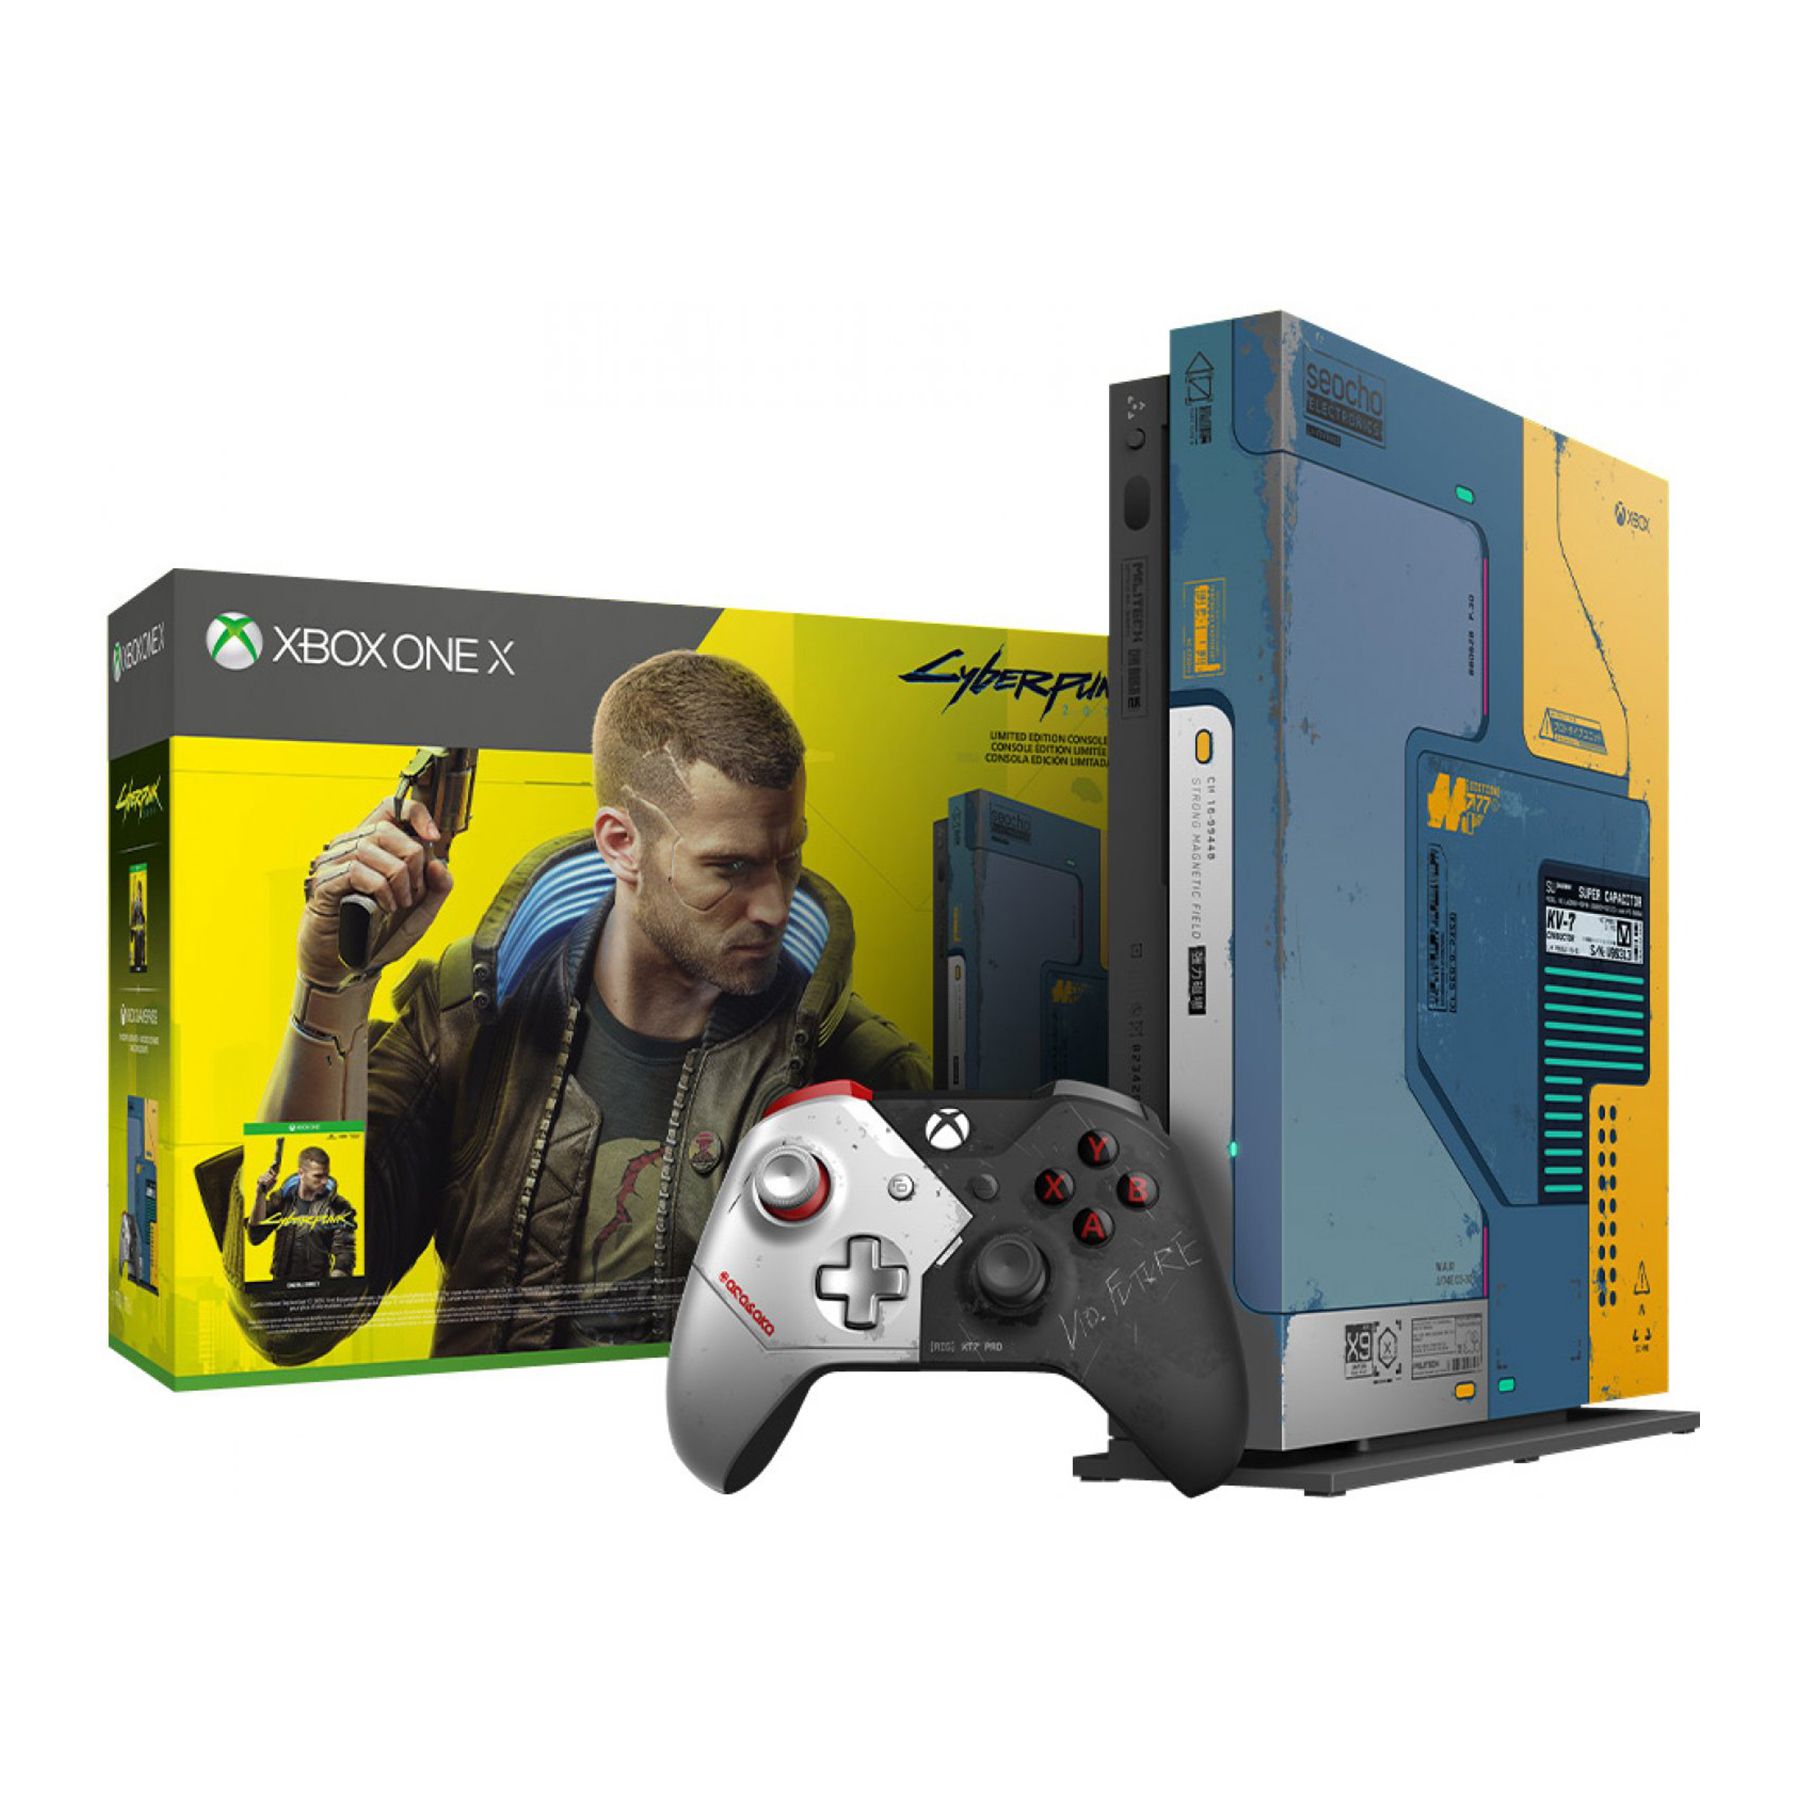 Majestuoso Obsesión Espesar Fingerhut - Xbox One X 1TB Cyberpunk Limited Edition Console Bundle with  Wireless Controller and Cyberpunk 2077 Download